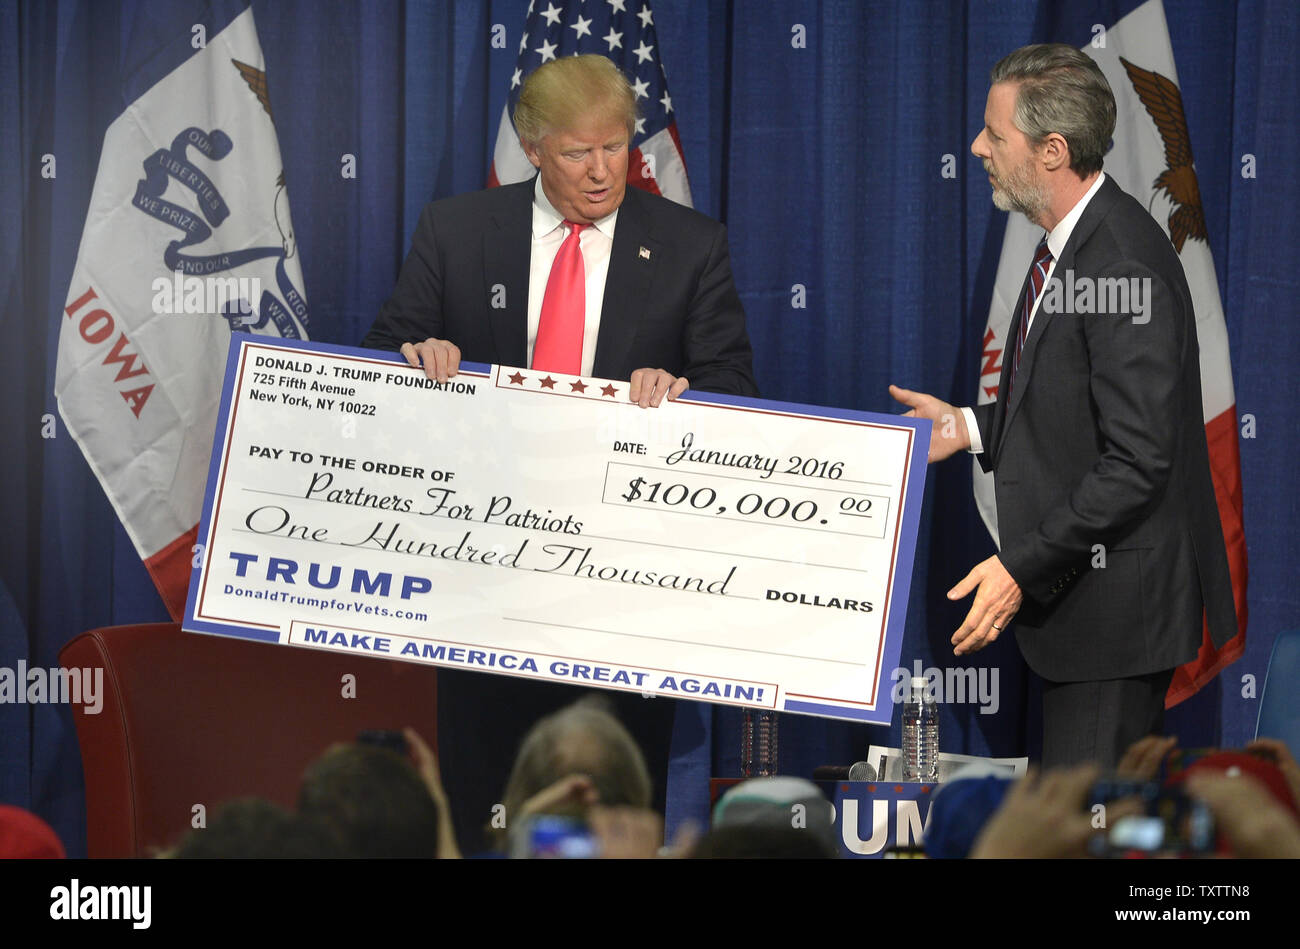 billionaire-businessman-donald-j-trump-l-2016-republican-presidential-candidate-and-jerry-falwell-jr-president-of-liberty-university-holds-up-a-facsimile-check-for-partners-for-patriots-a-veterans-group-january-31-2016-in-council-bluffs-iowa-trump-is-leading-in-many-polls-against-a-large-field-of-gop-candidates-including-texas-sen-ted-cruz-florida-sen-marco-rubio-and-retired-neurosurgeon-ben-carson-as-they-head-into-the-homestretch-ahead-of-iowas-first-in-the-nation-caucuses-february-1-photo-by-mike-theilerupi-TXTTN8.jpg